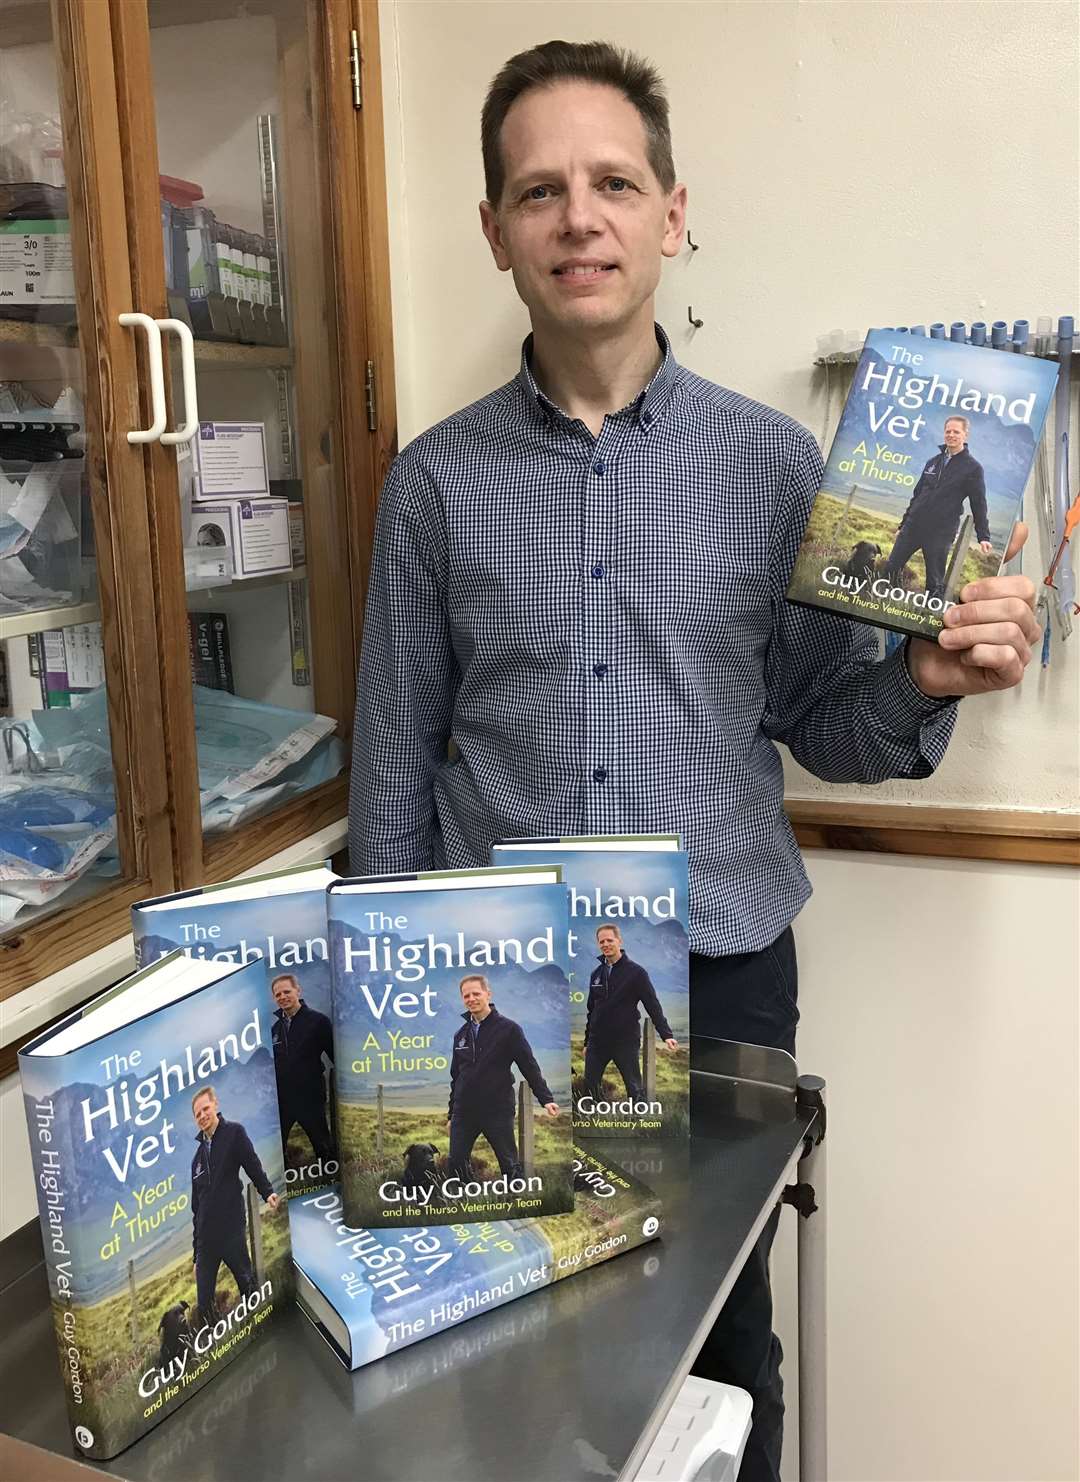 Thurso vet Guy Gordon with his new book which ties in with the TV series The Highland Vet.